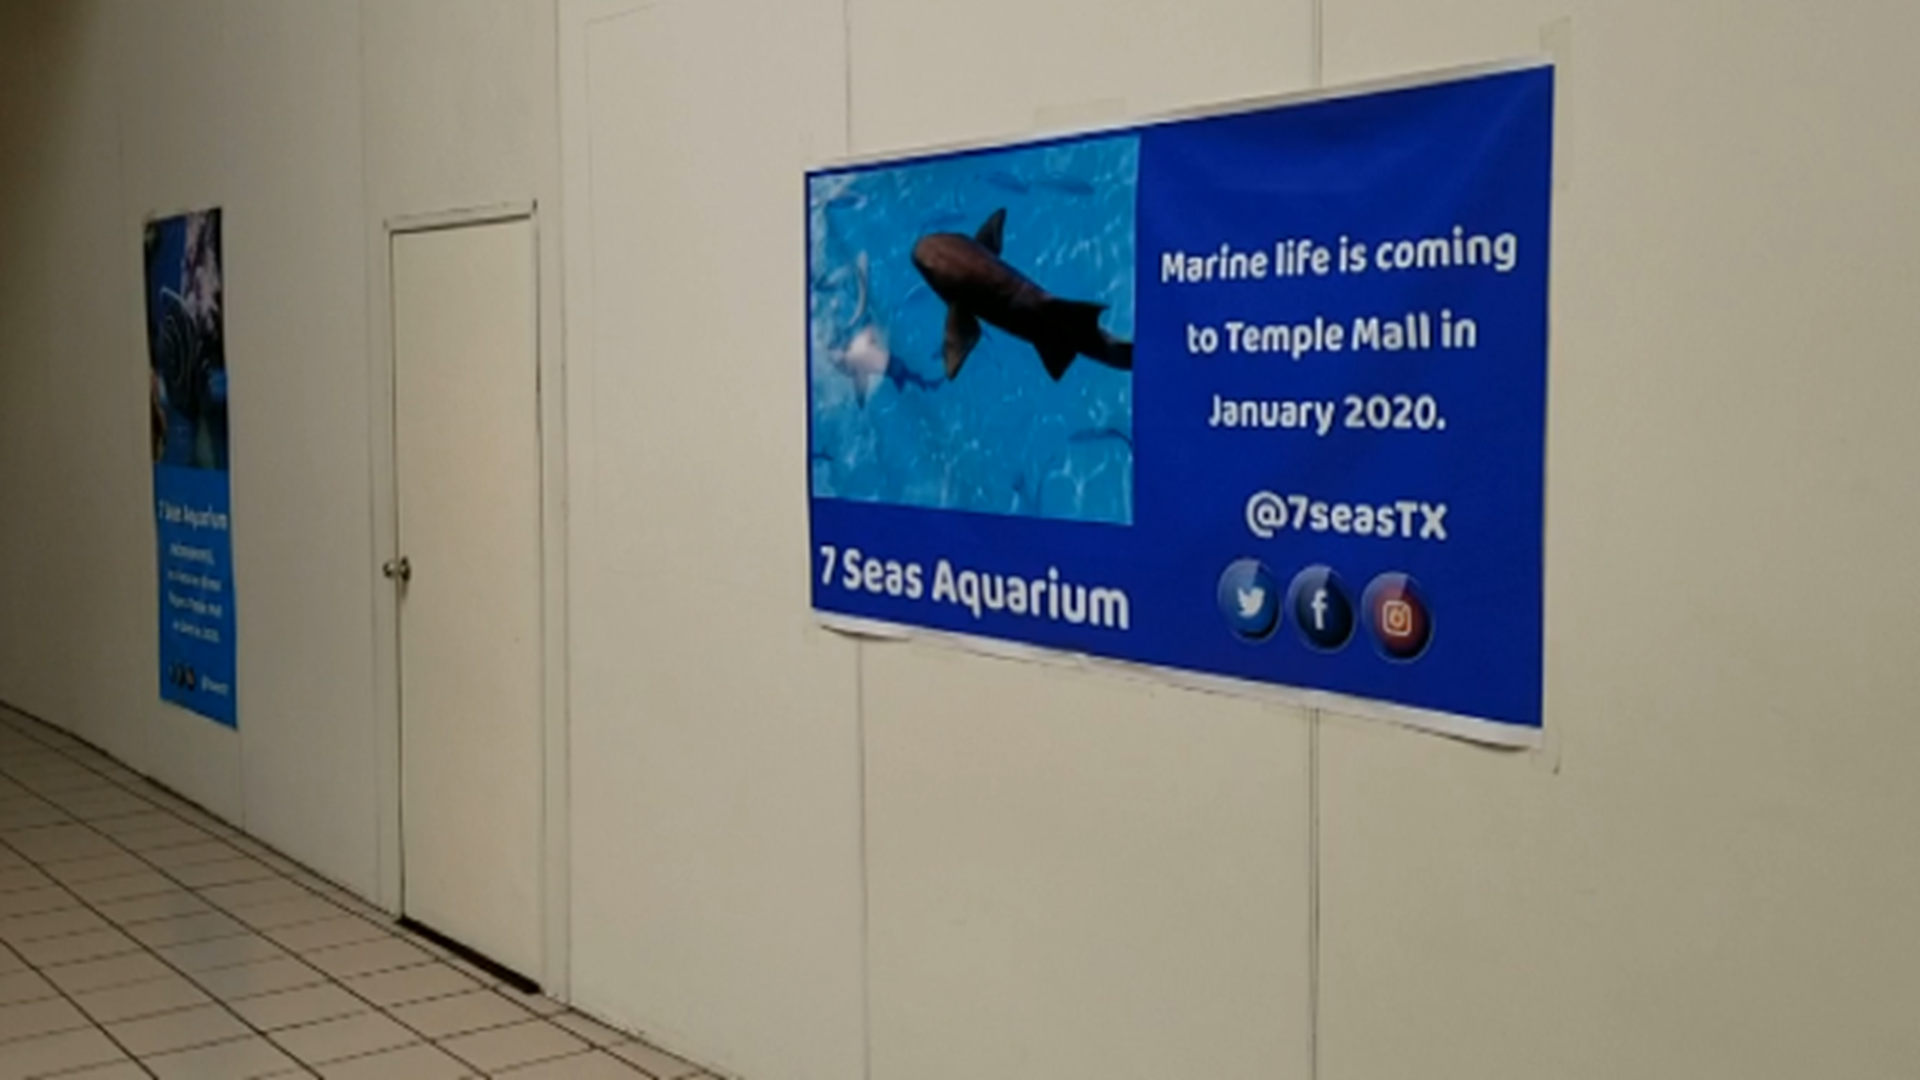 Temple locals have bought $99 season passes for 7 Seas Aquarium, but after looking at city emails, it's not clear when or if the business will ever open.